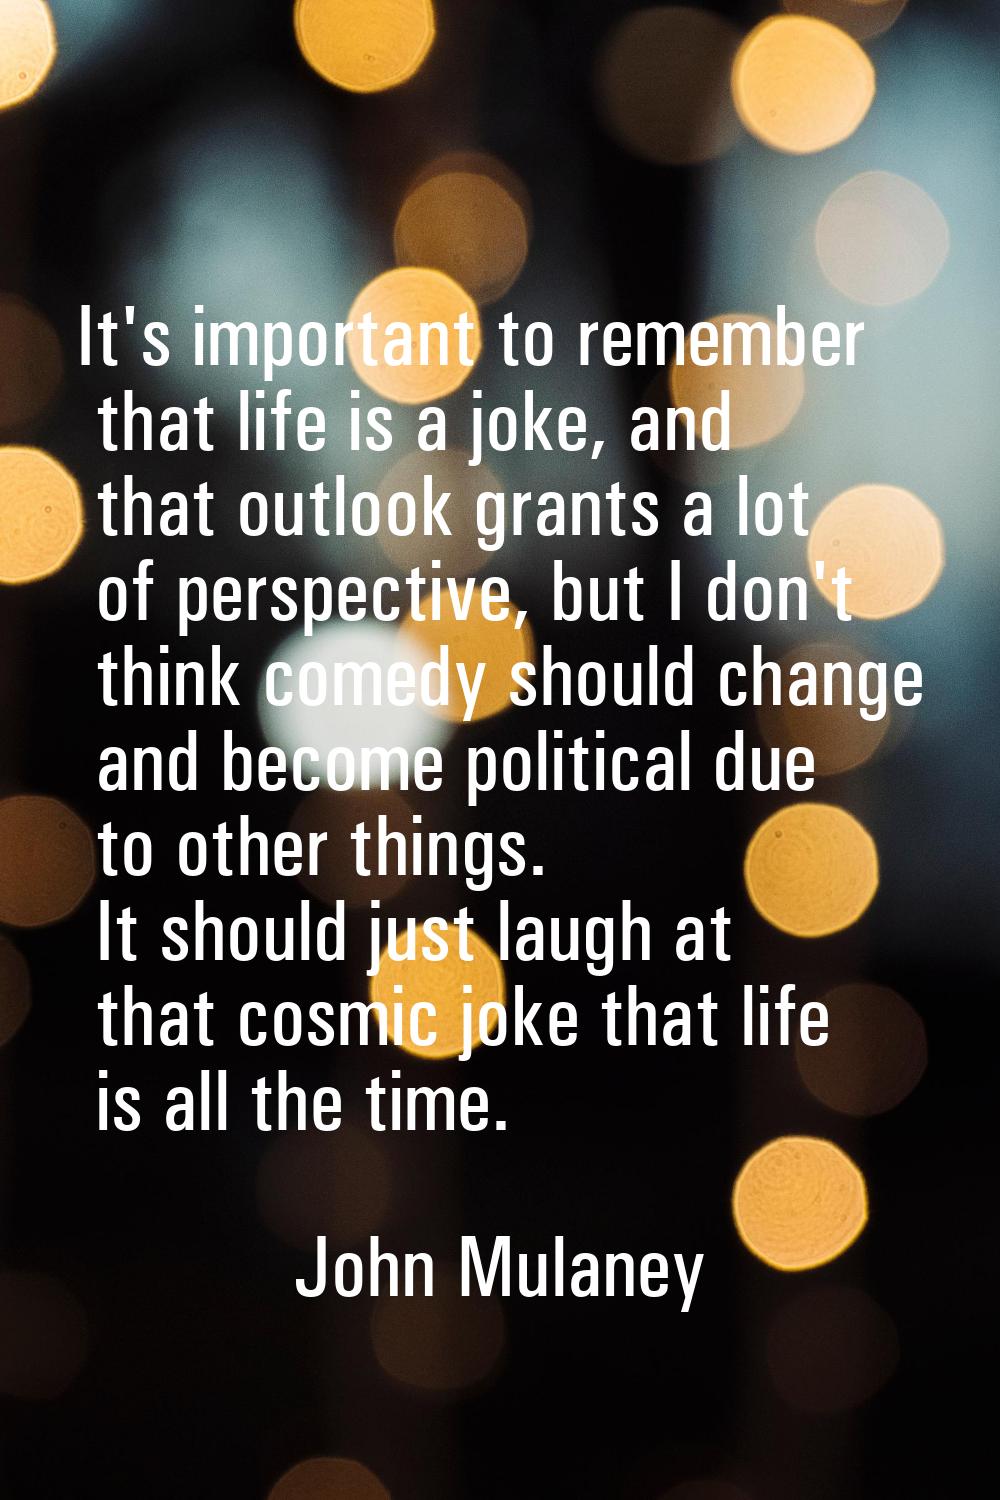 It's important to remember that life is a joke, and that outlook grants a lot of perspective, but I